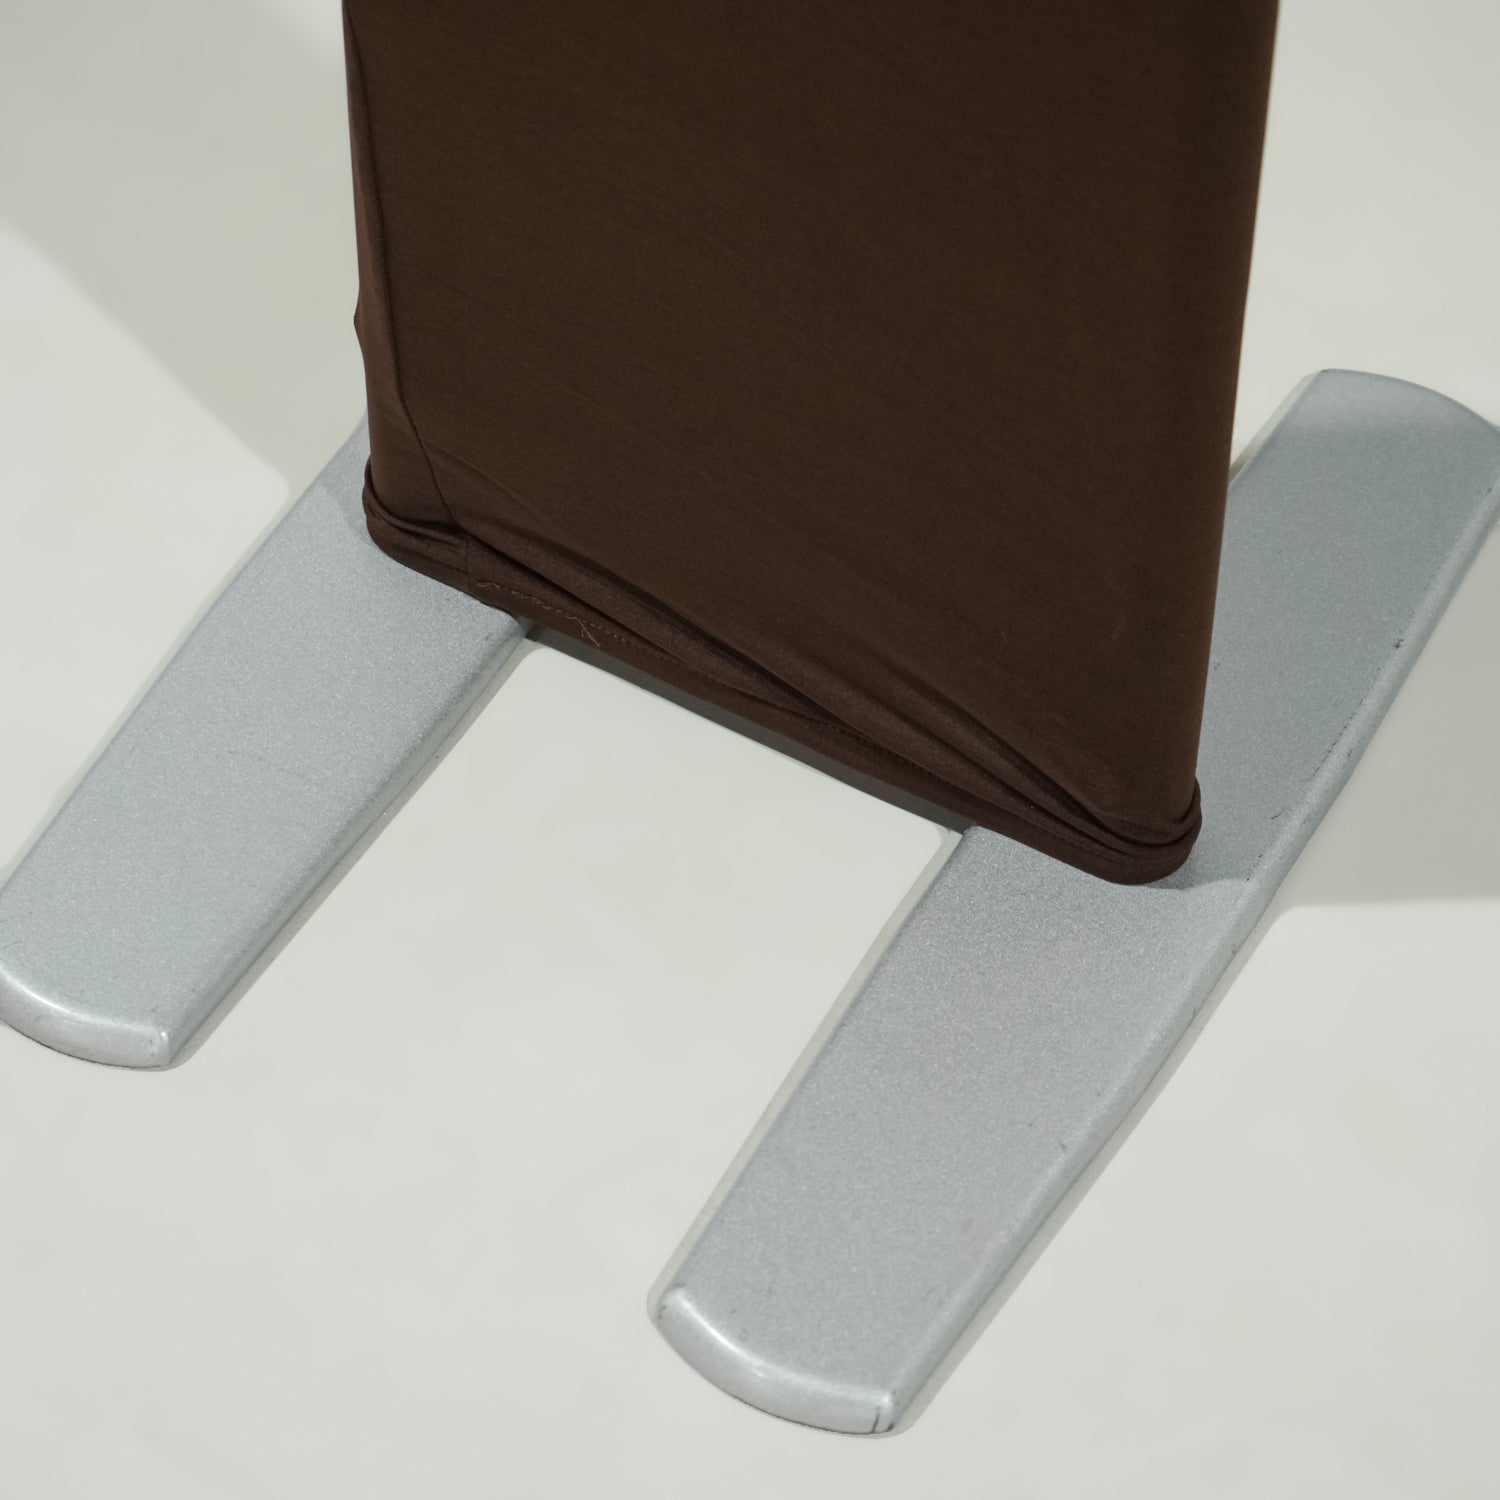 Open Center Spandex Arch Cover - Chocolate Brown